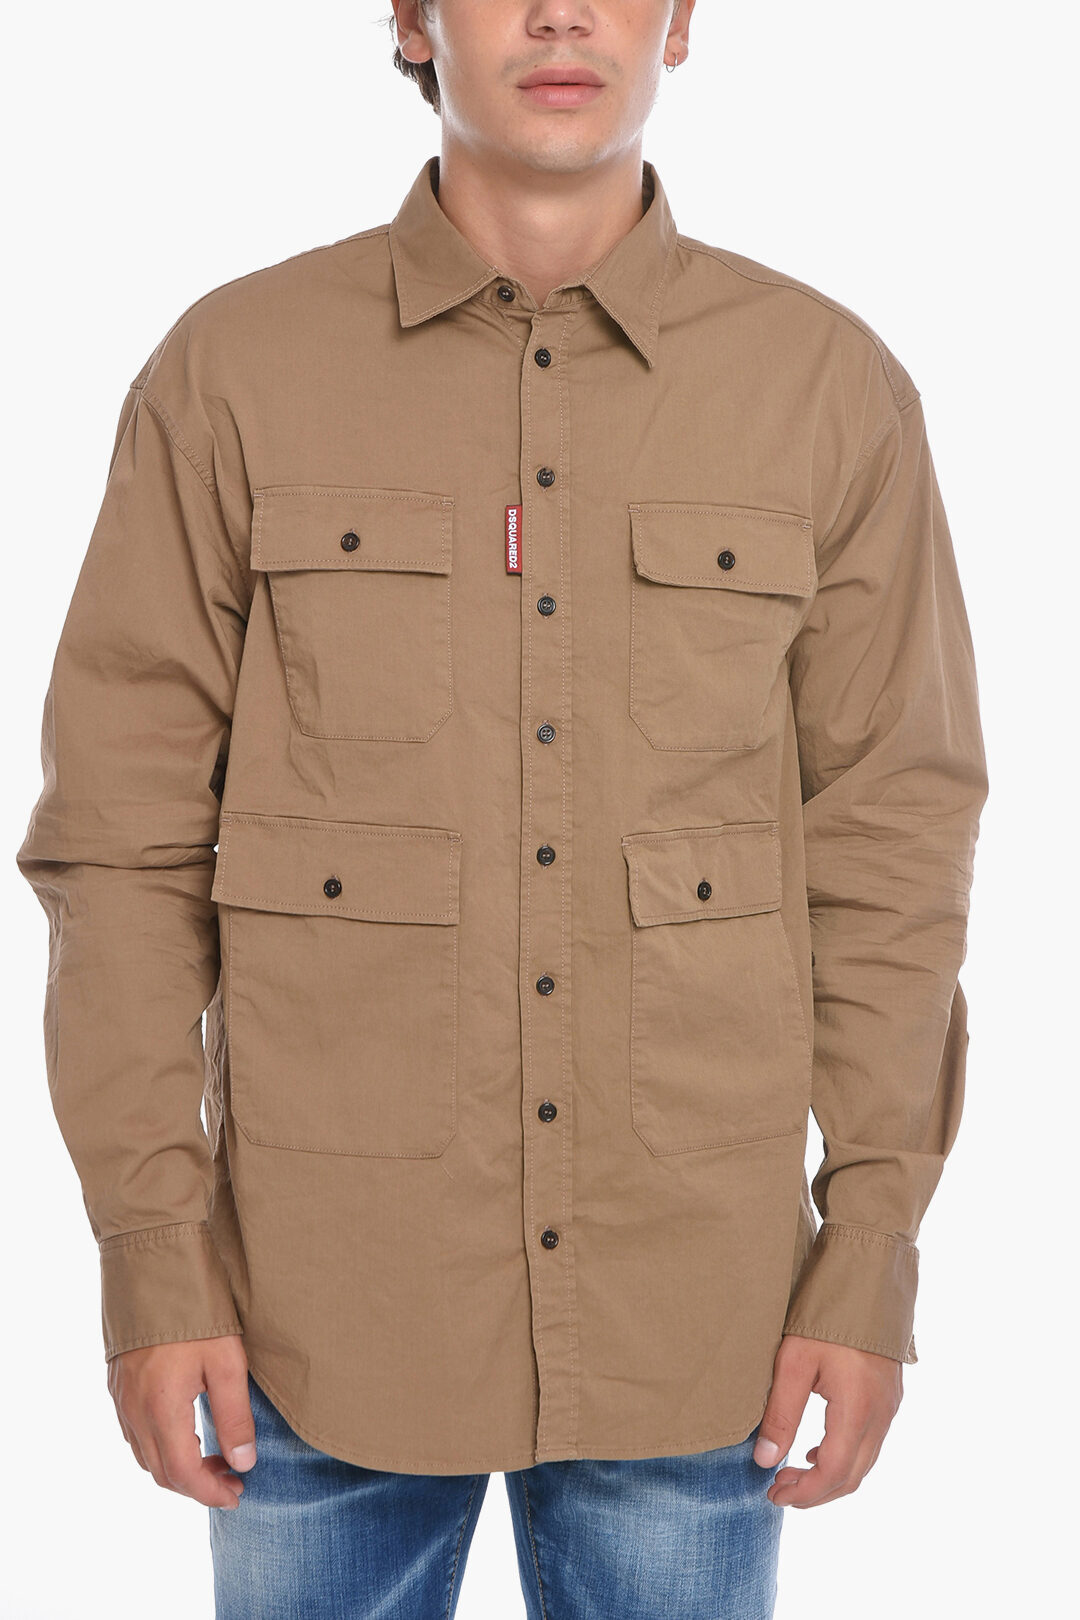 DSQUARED2 ディースクエアード シャツ S71DM0572 S35175 157 メンズ LONG SLEEEVED SHIRT WITH FRONT POCKETS 【ラッピング無料】 dk